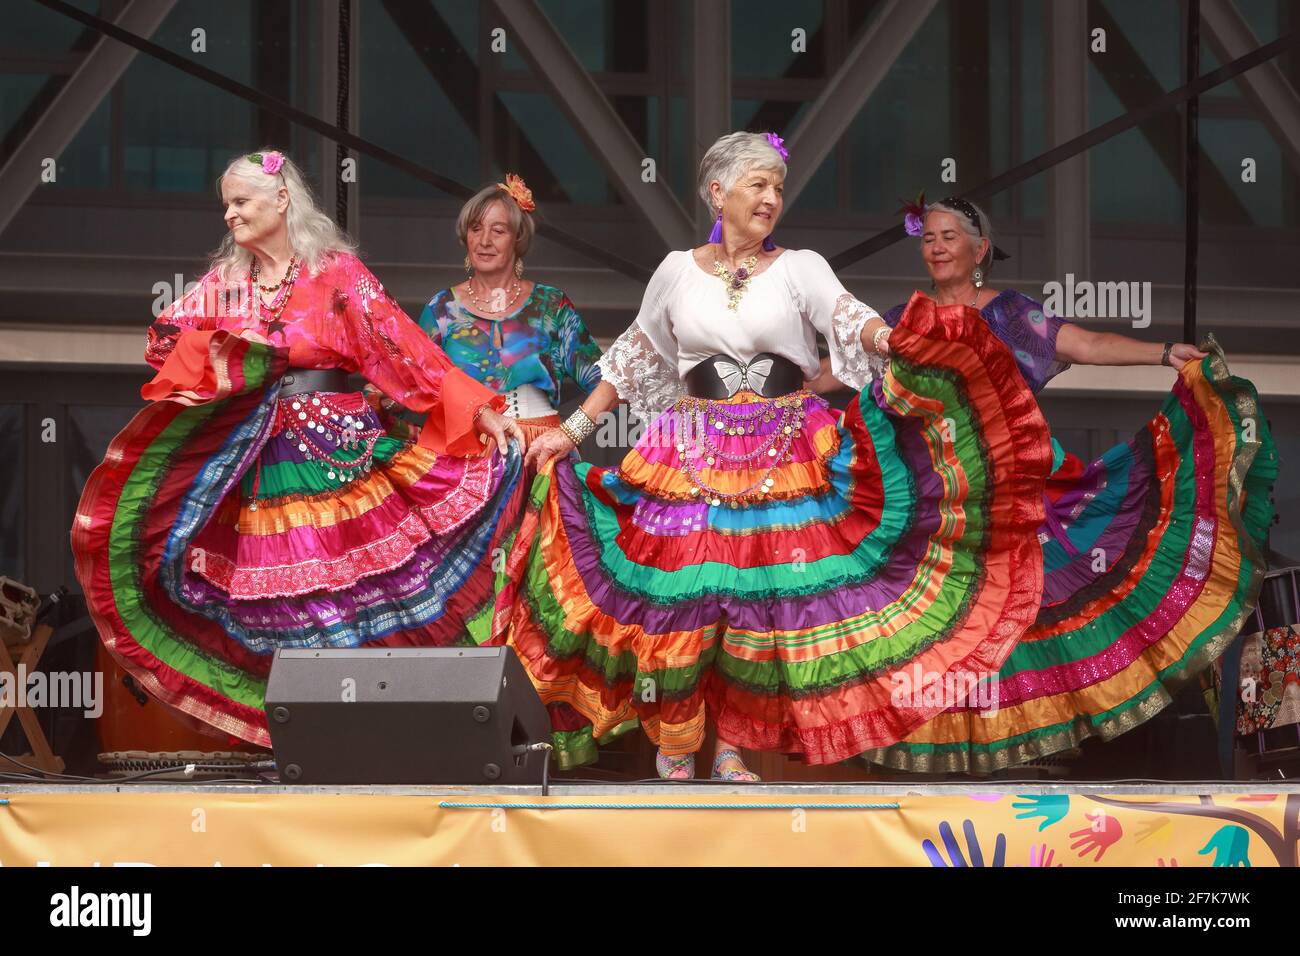 A group of gypsy dancers in long, colorful skirts performing on stage Stock Photo